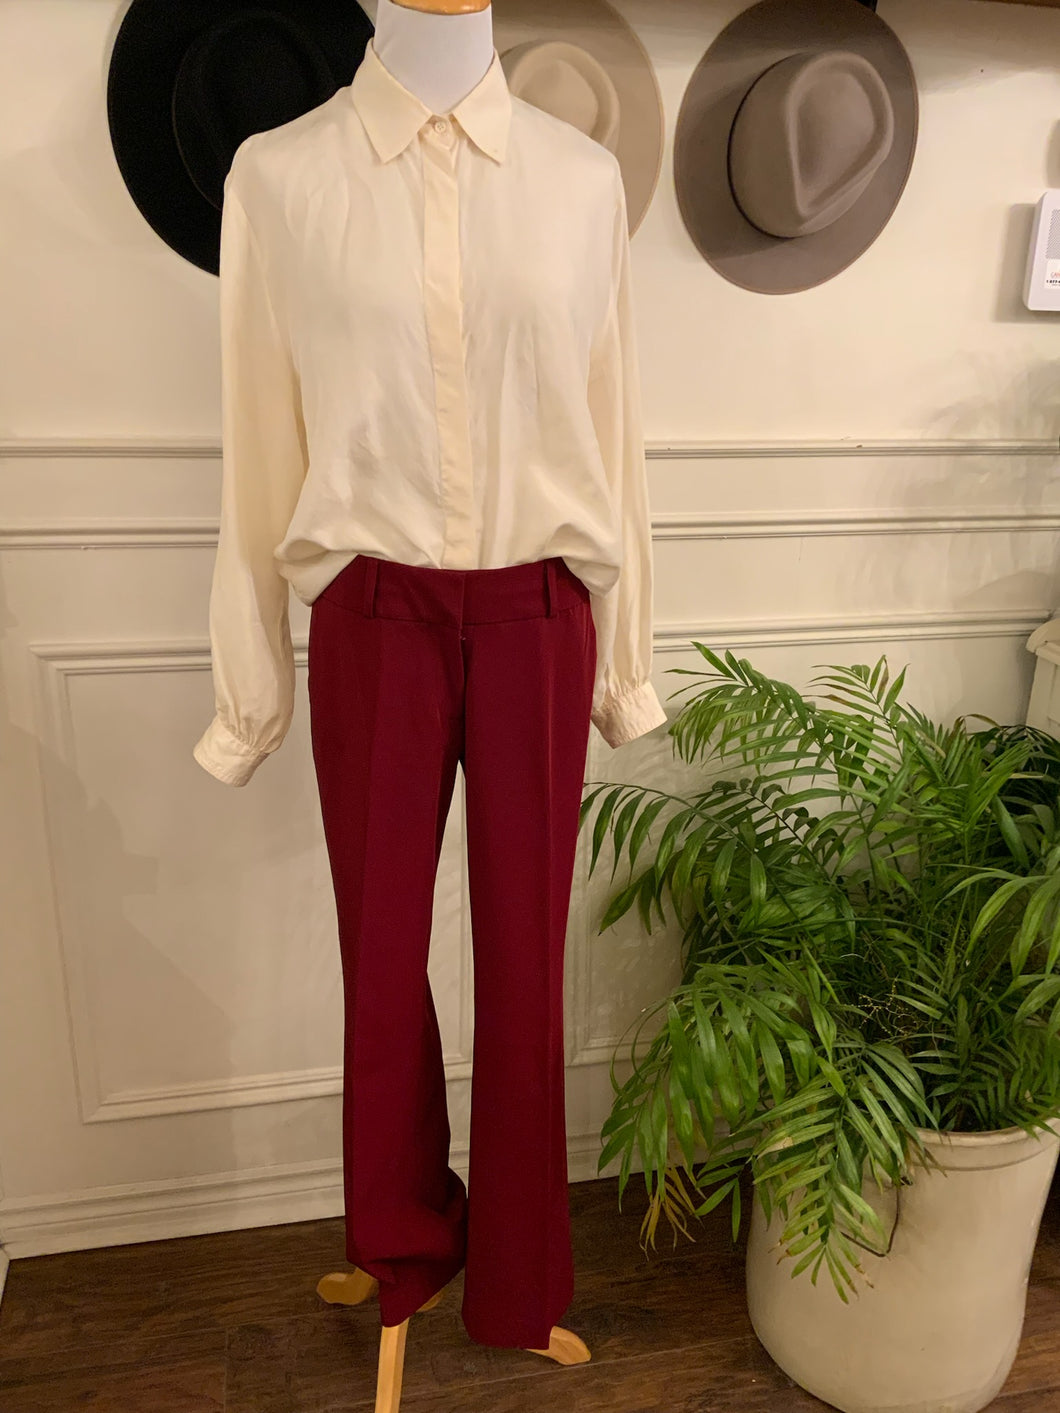 Red Trousers (Size 5/6)